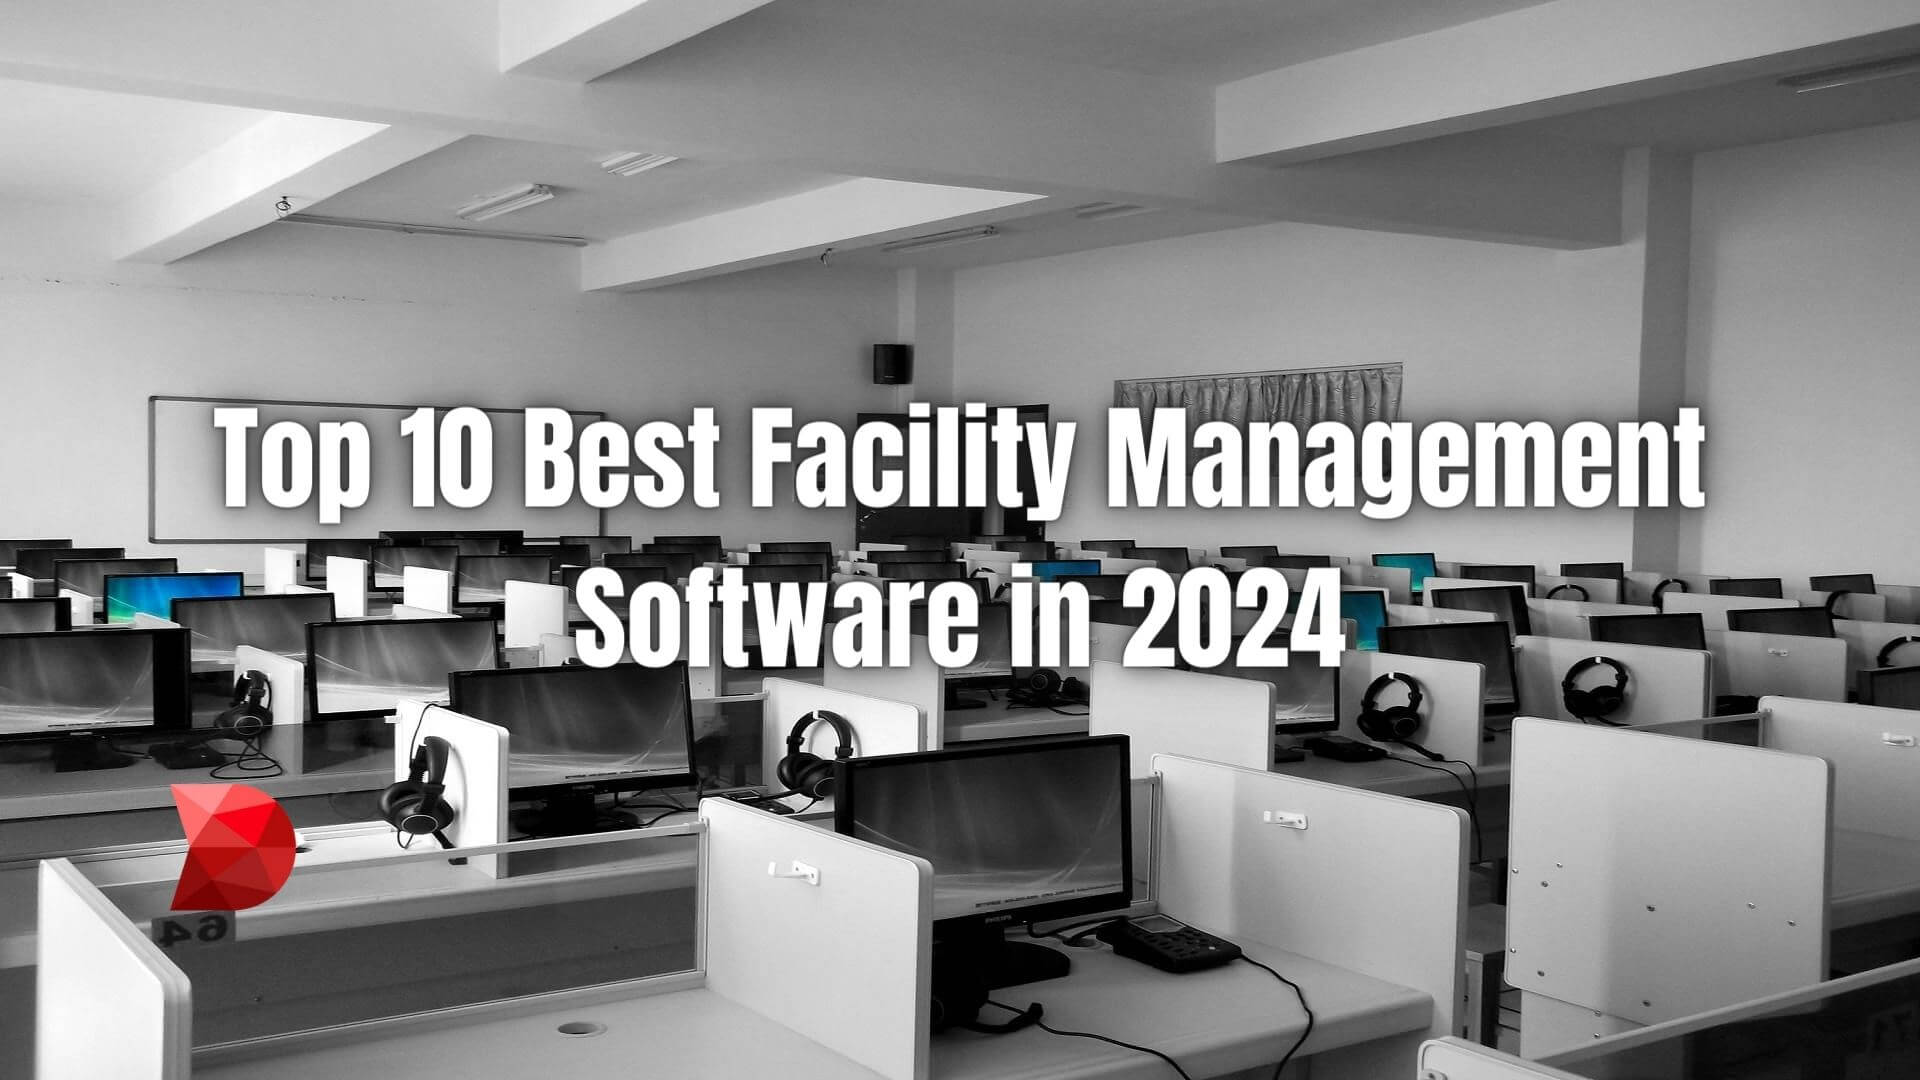 Streamline operations and enhance efficiency! Click here to learn about the top 10 facility management software solutions for 2024.